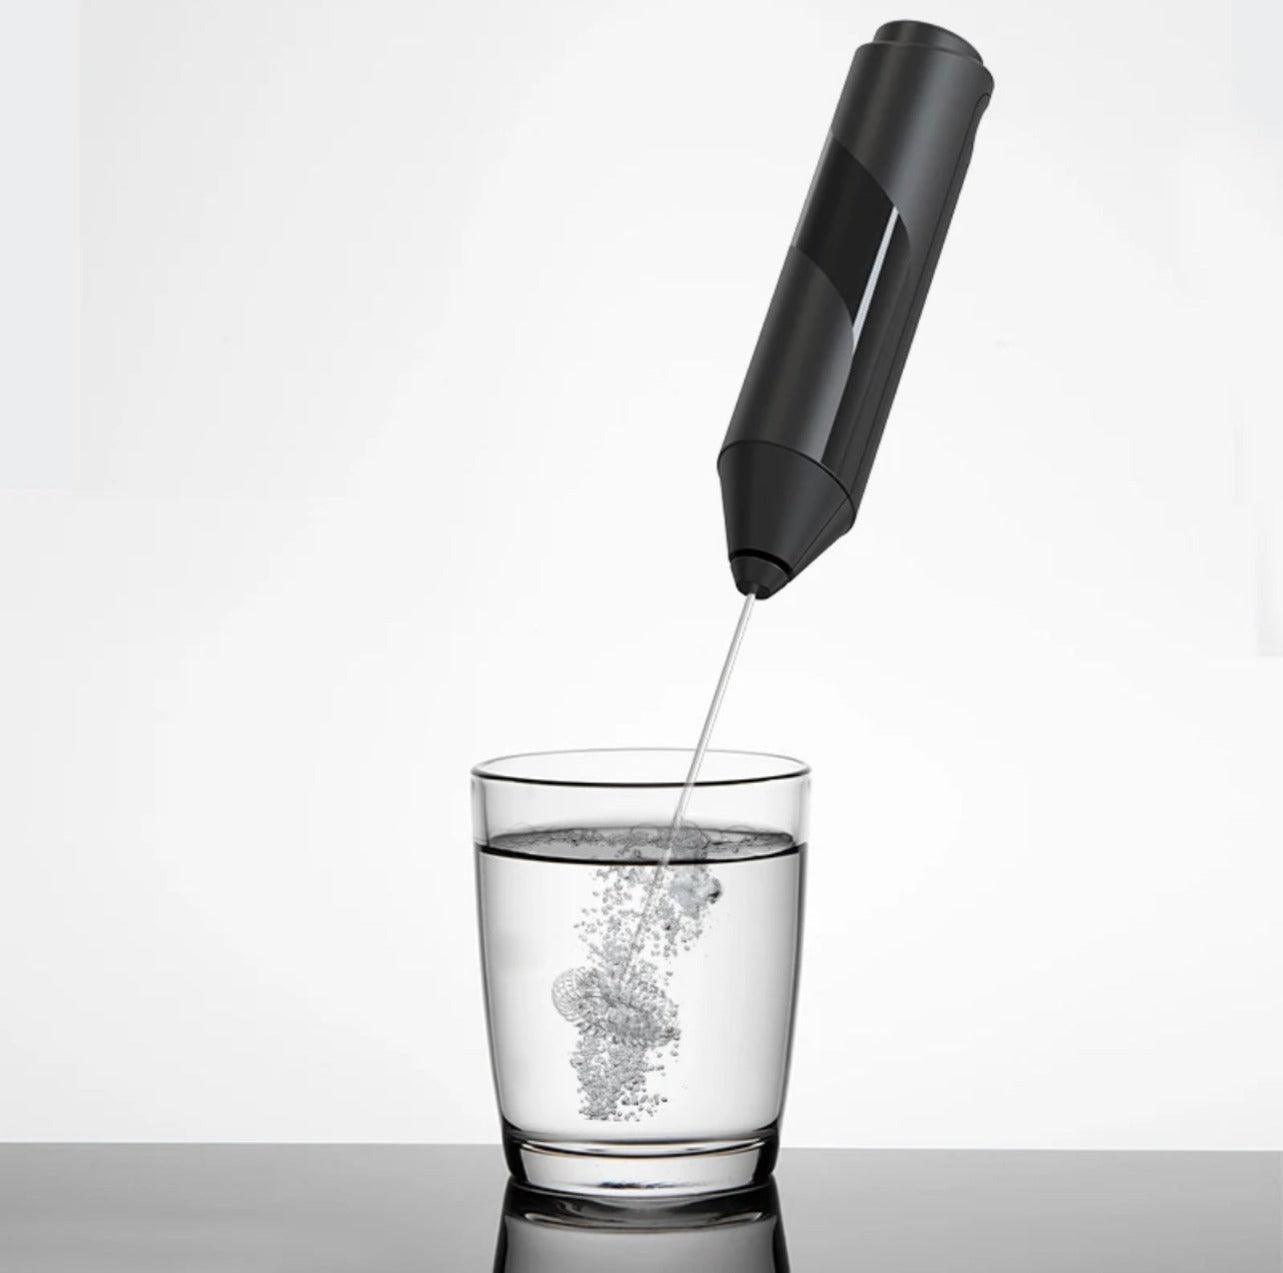 Handheld Electric Milk Frother - Expat Life Style